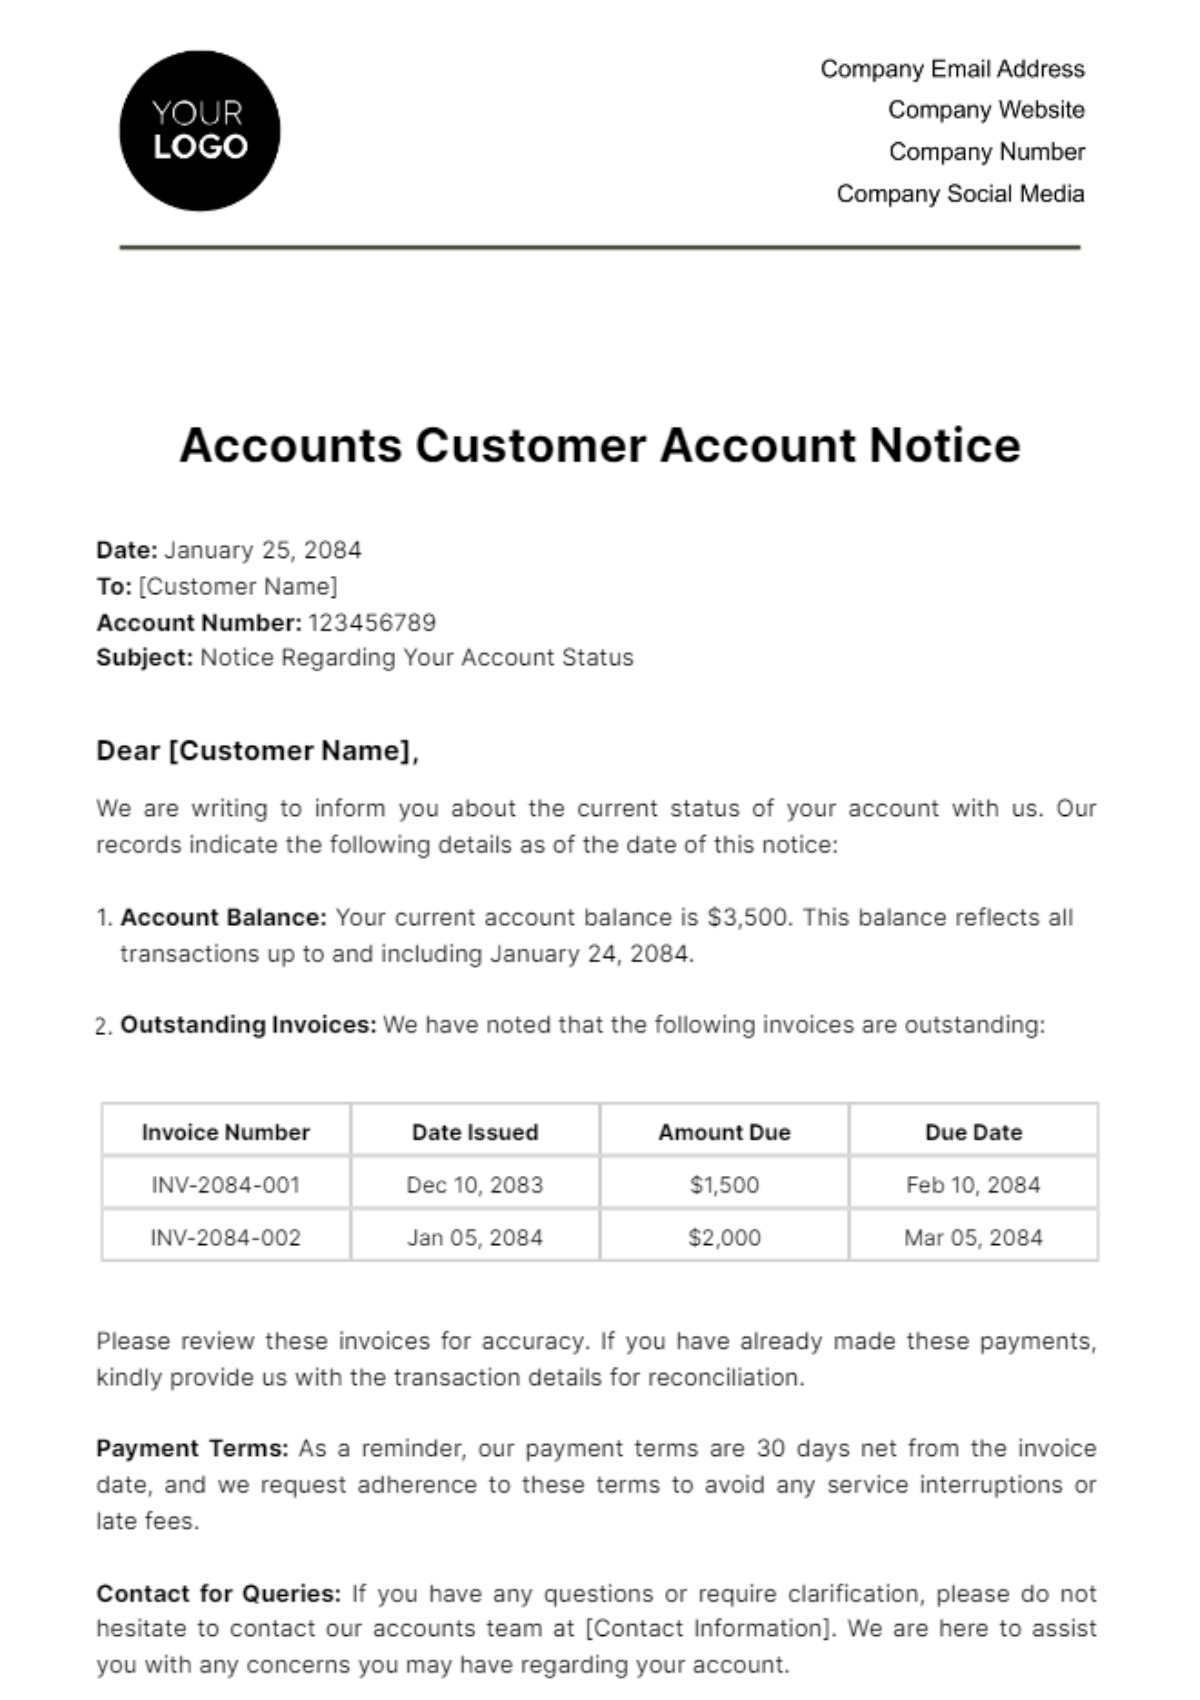 Free Accounts Customer Account Notice Template